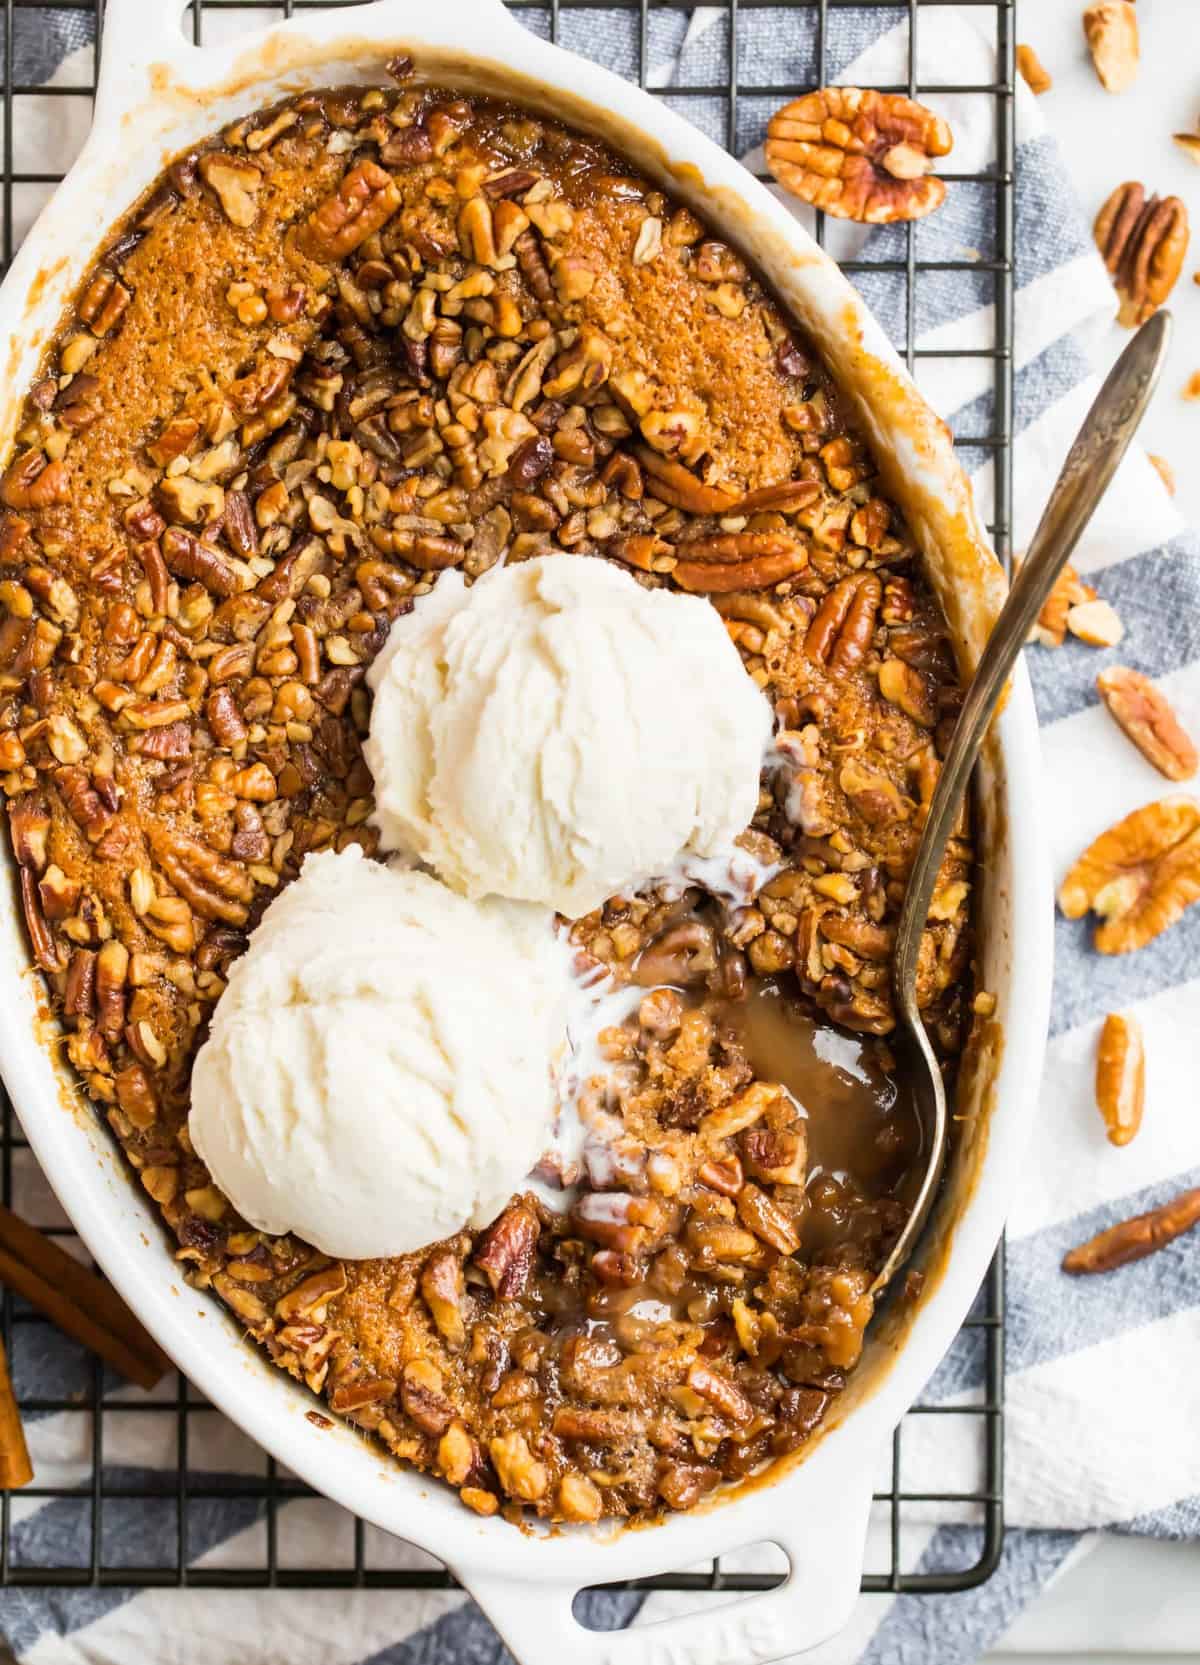 peacan pie cobbler in white baking dish topped with ice cream